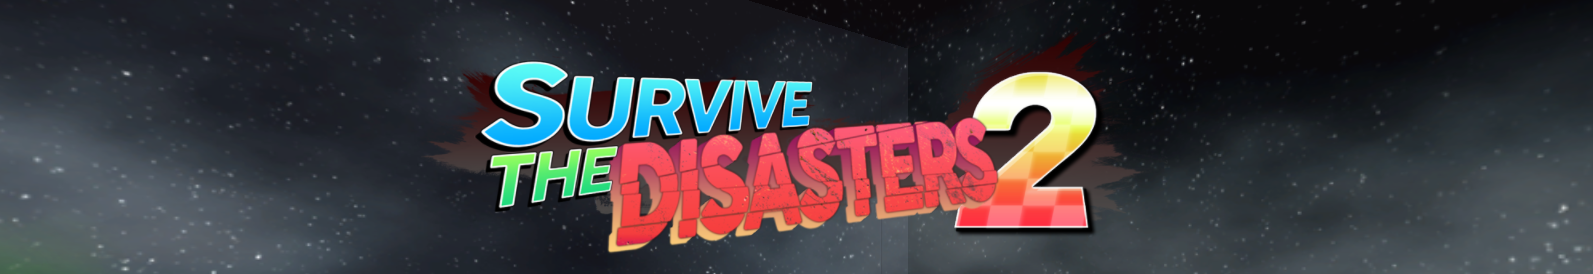 Review Survive The Disasters 2 Survive The Disasters 2 Is A Sequal To By Euik Impormasyon Medium - survive the disasters 2 2 badges roblox